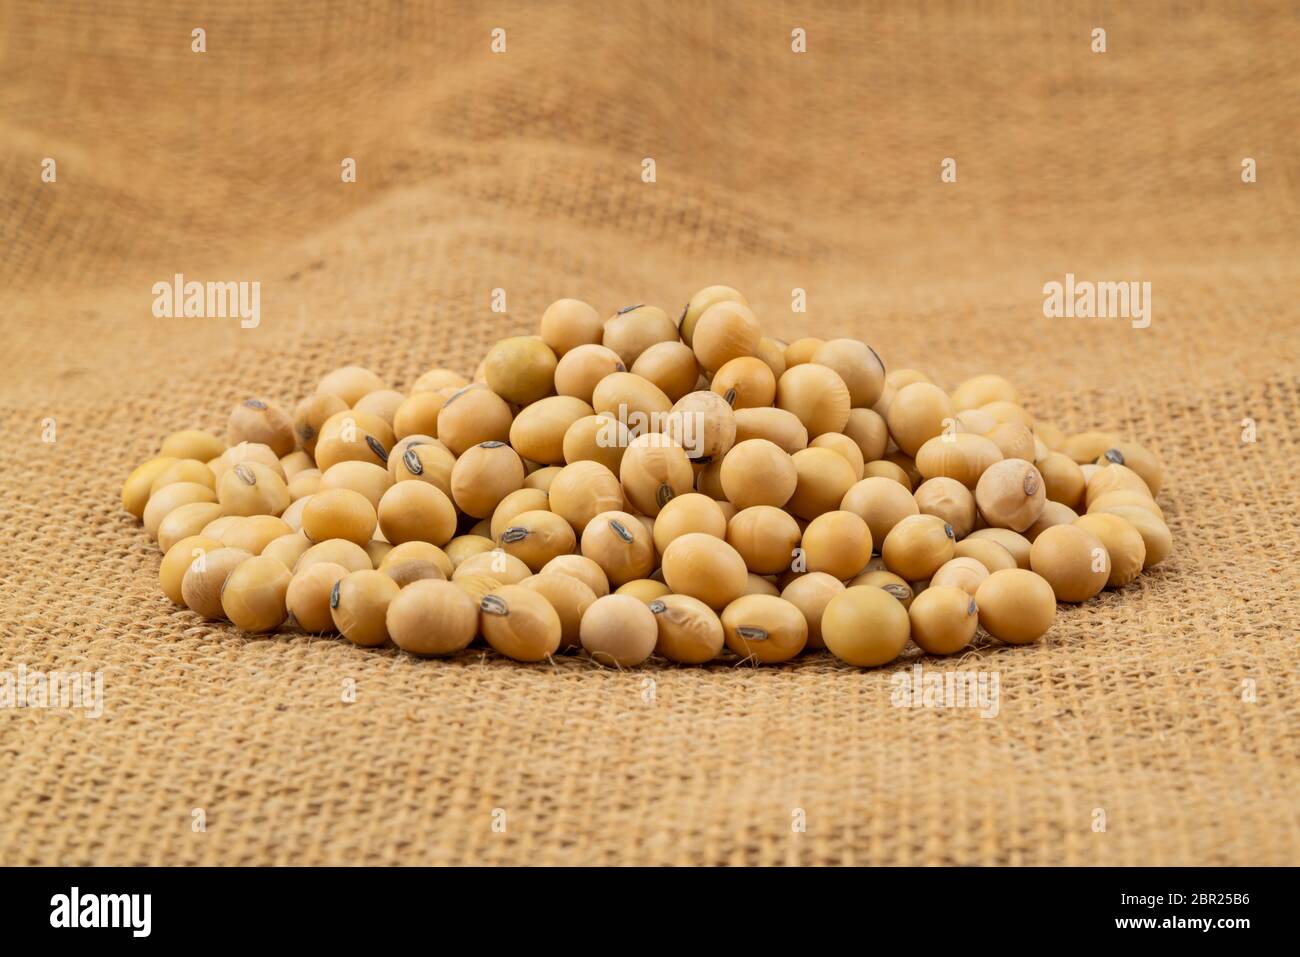 Pile of soy beans on sackcloth. Soybean is annual legume of the pea family. Stock Photo